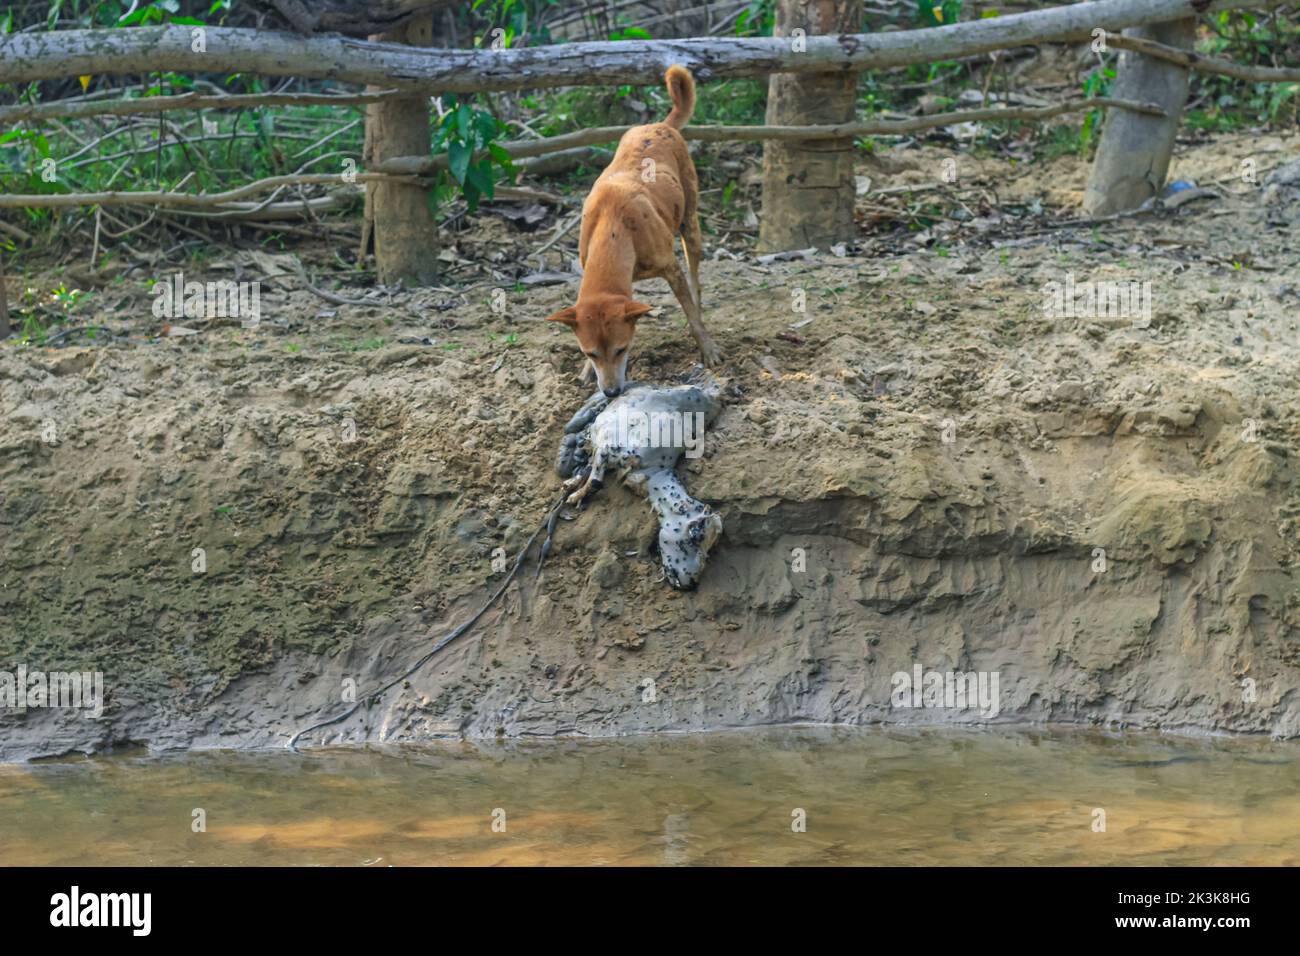 A dog is eating a rotten goat on the bank of the river. Outdoor landscape photo of the street wild dog eating a dead body of a goat. Stock Photo